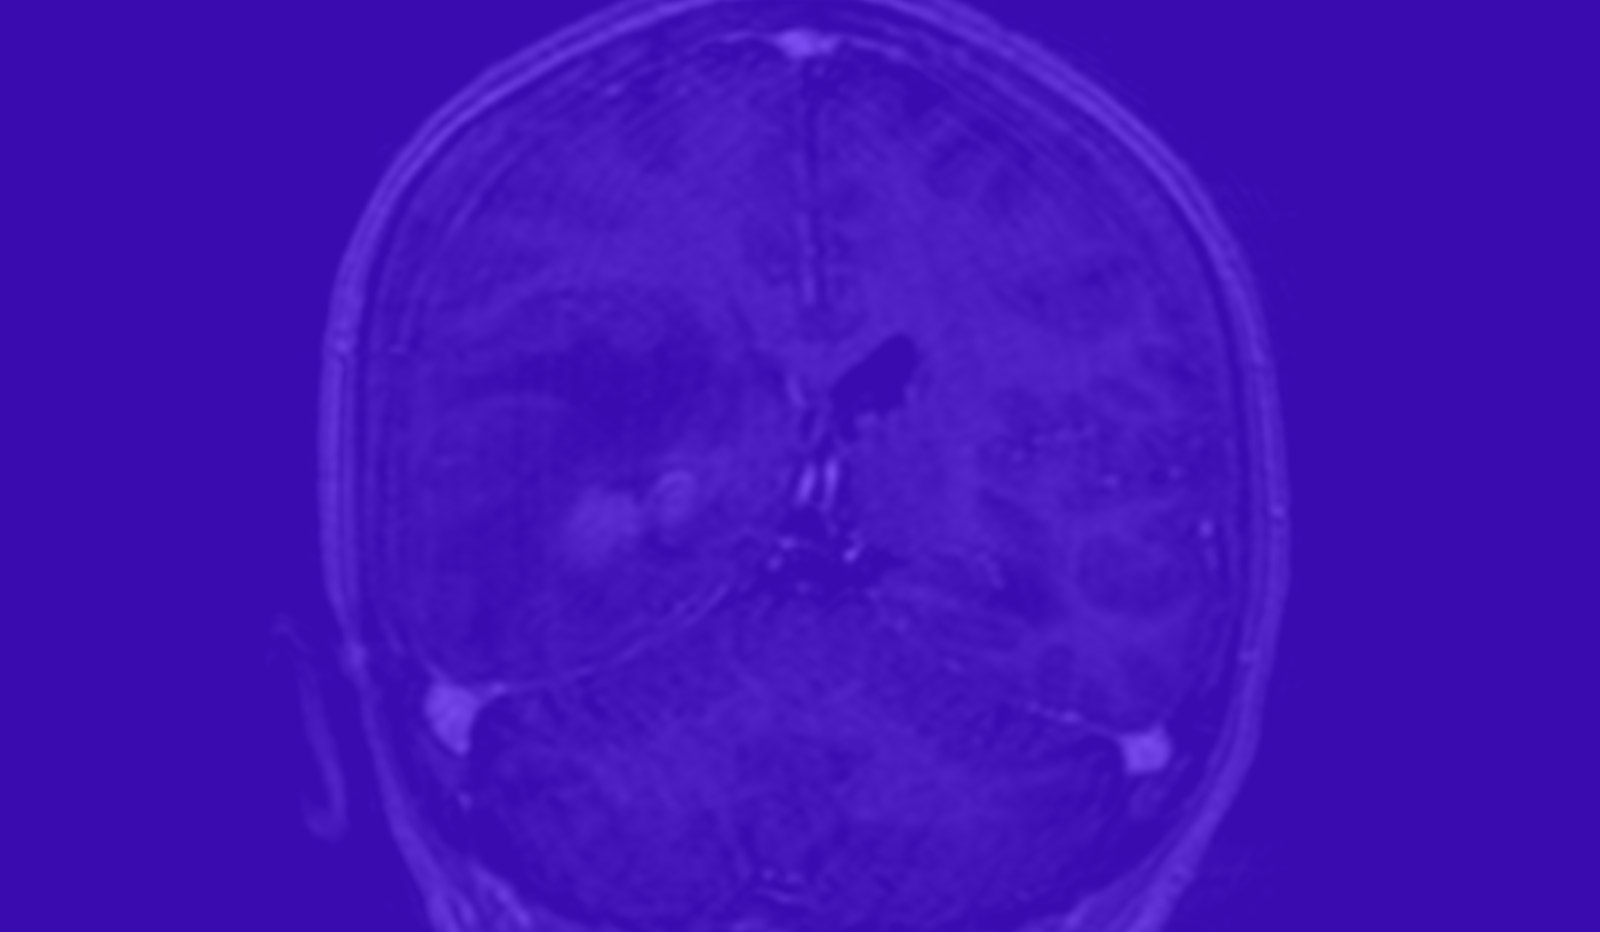 A patient with severe neurological symptoms in the hematology department